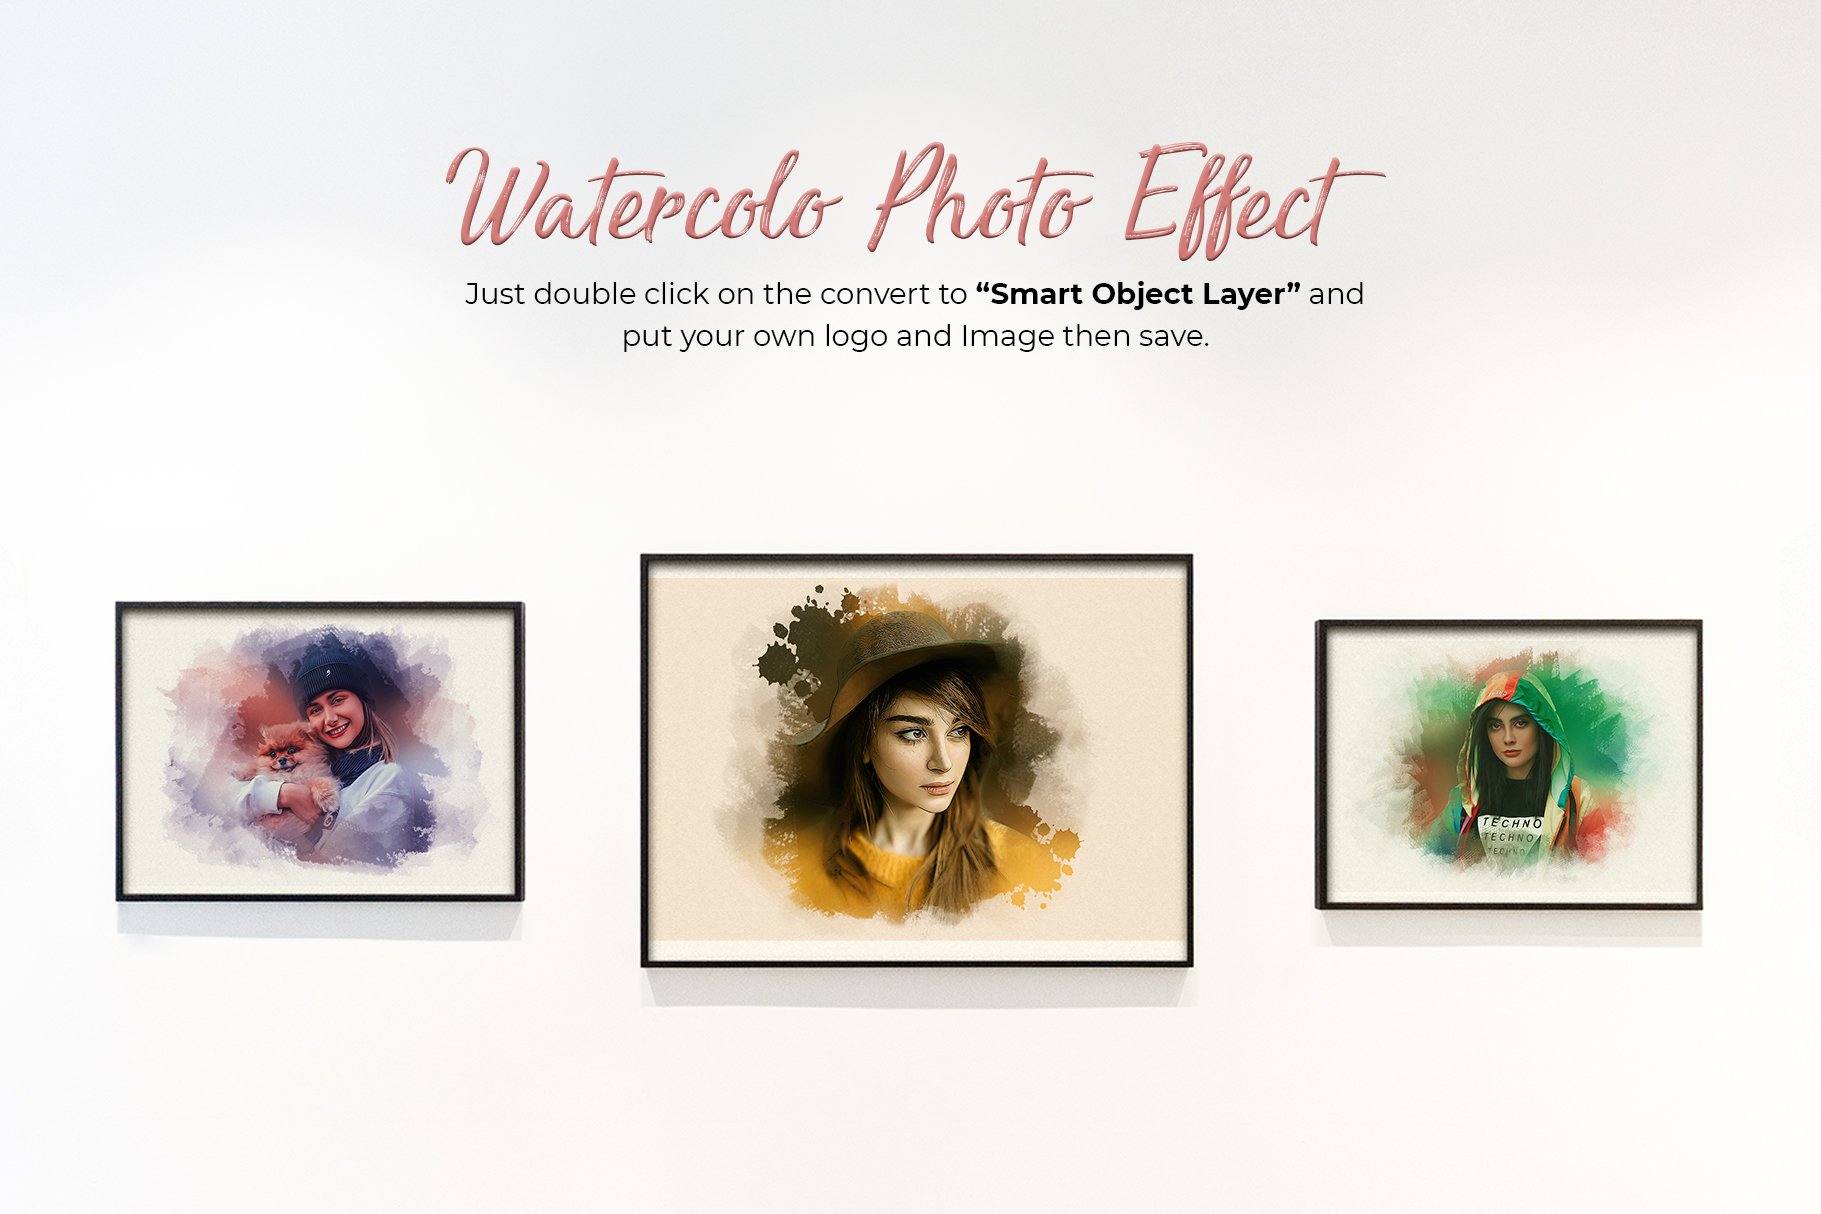 Watercolor Photo Effect Templatepreview image.